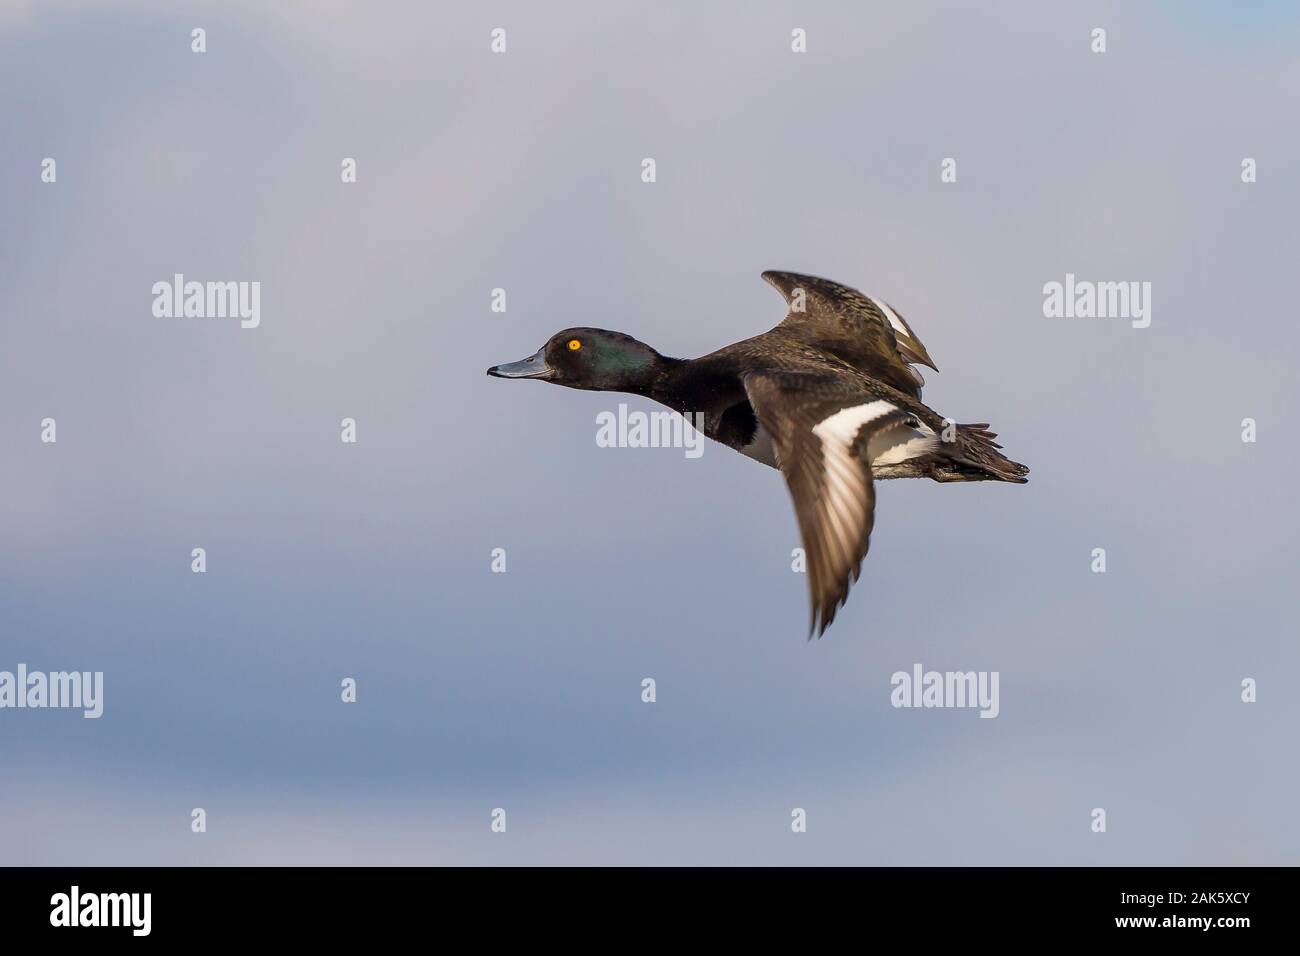 Side view of wild male UK tufted duck (Aythya fuligula) isolated in flight wings spread, facing left.Tufted drake flying in midair, blue sky. Stock Photo